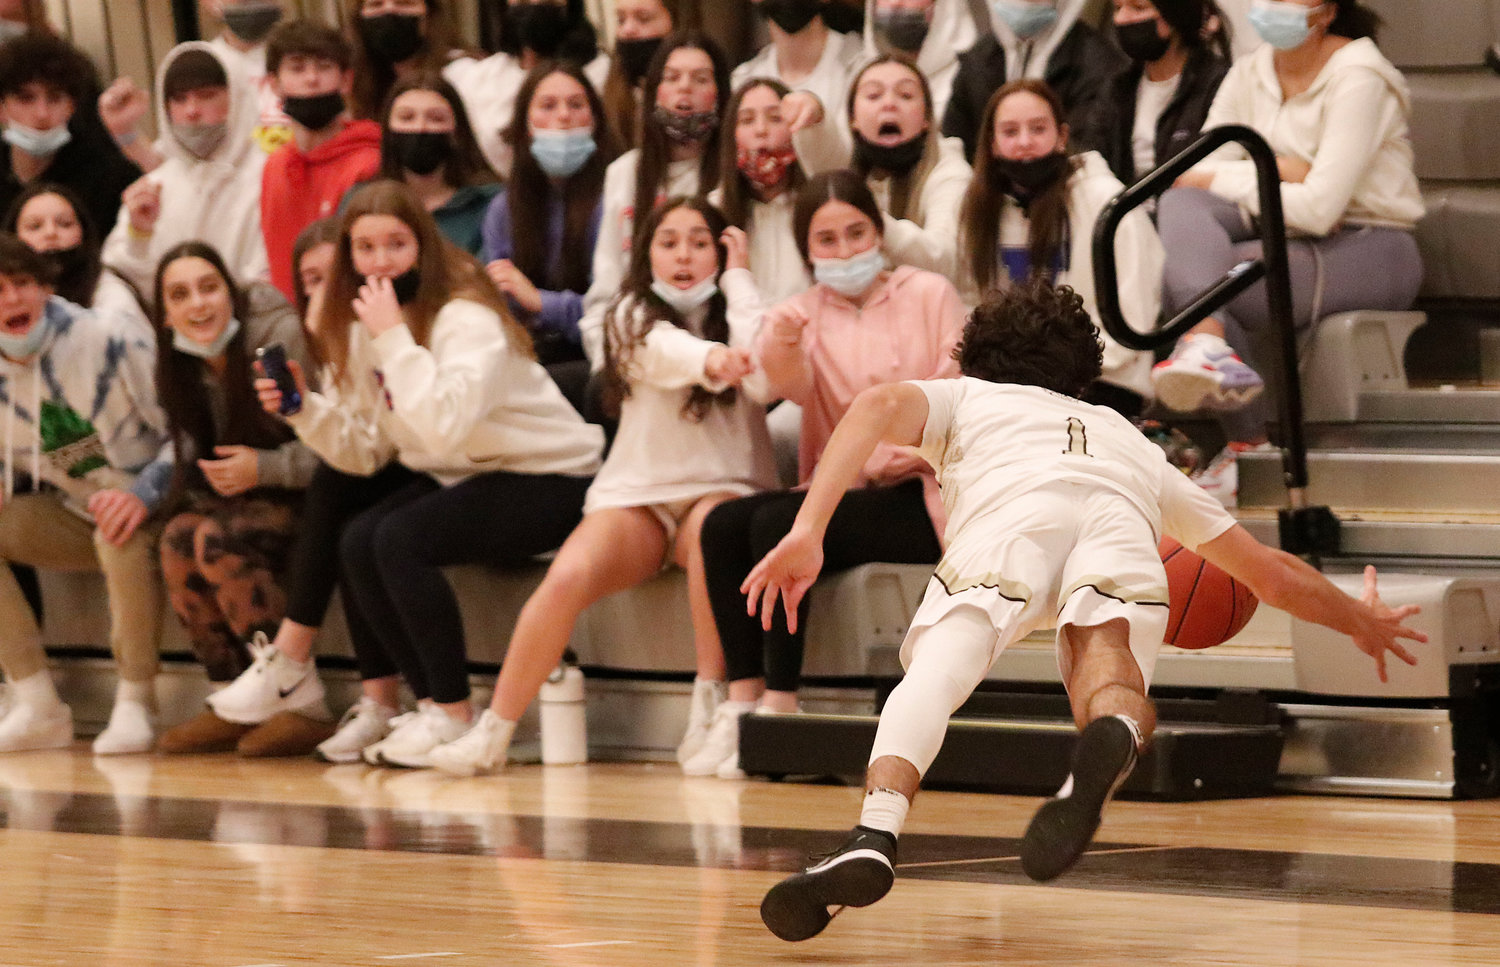 Blue Devils fans look on as Junior guard Hunter Brodeur saves the ball from going out in the fourth quarter with the Wildcats clinging to a three point lead.